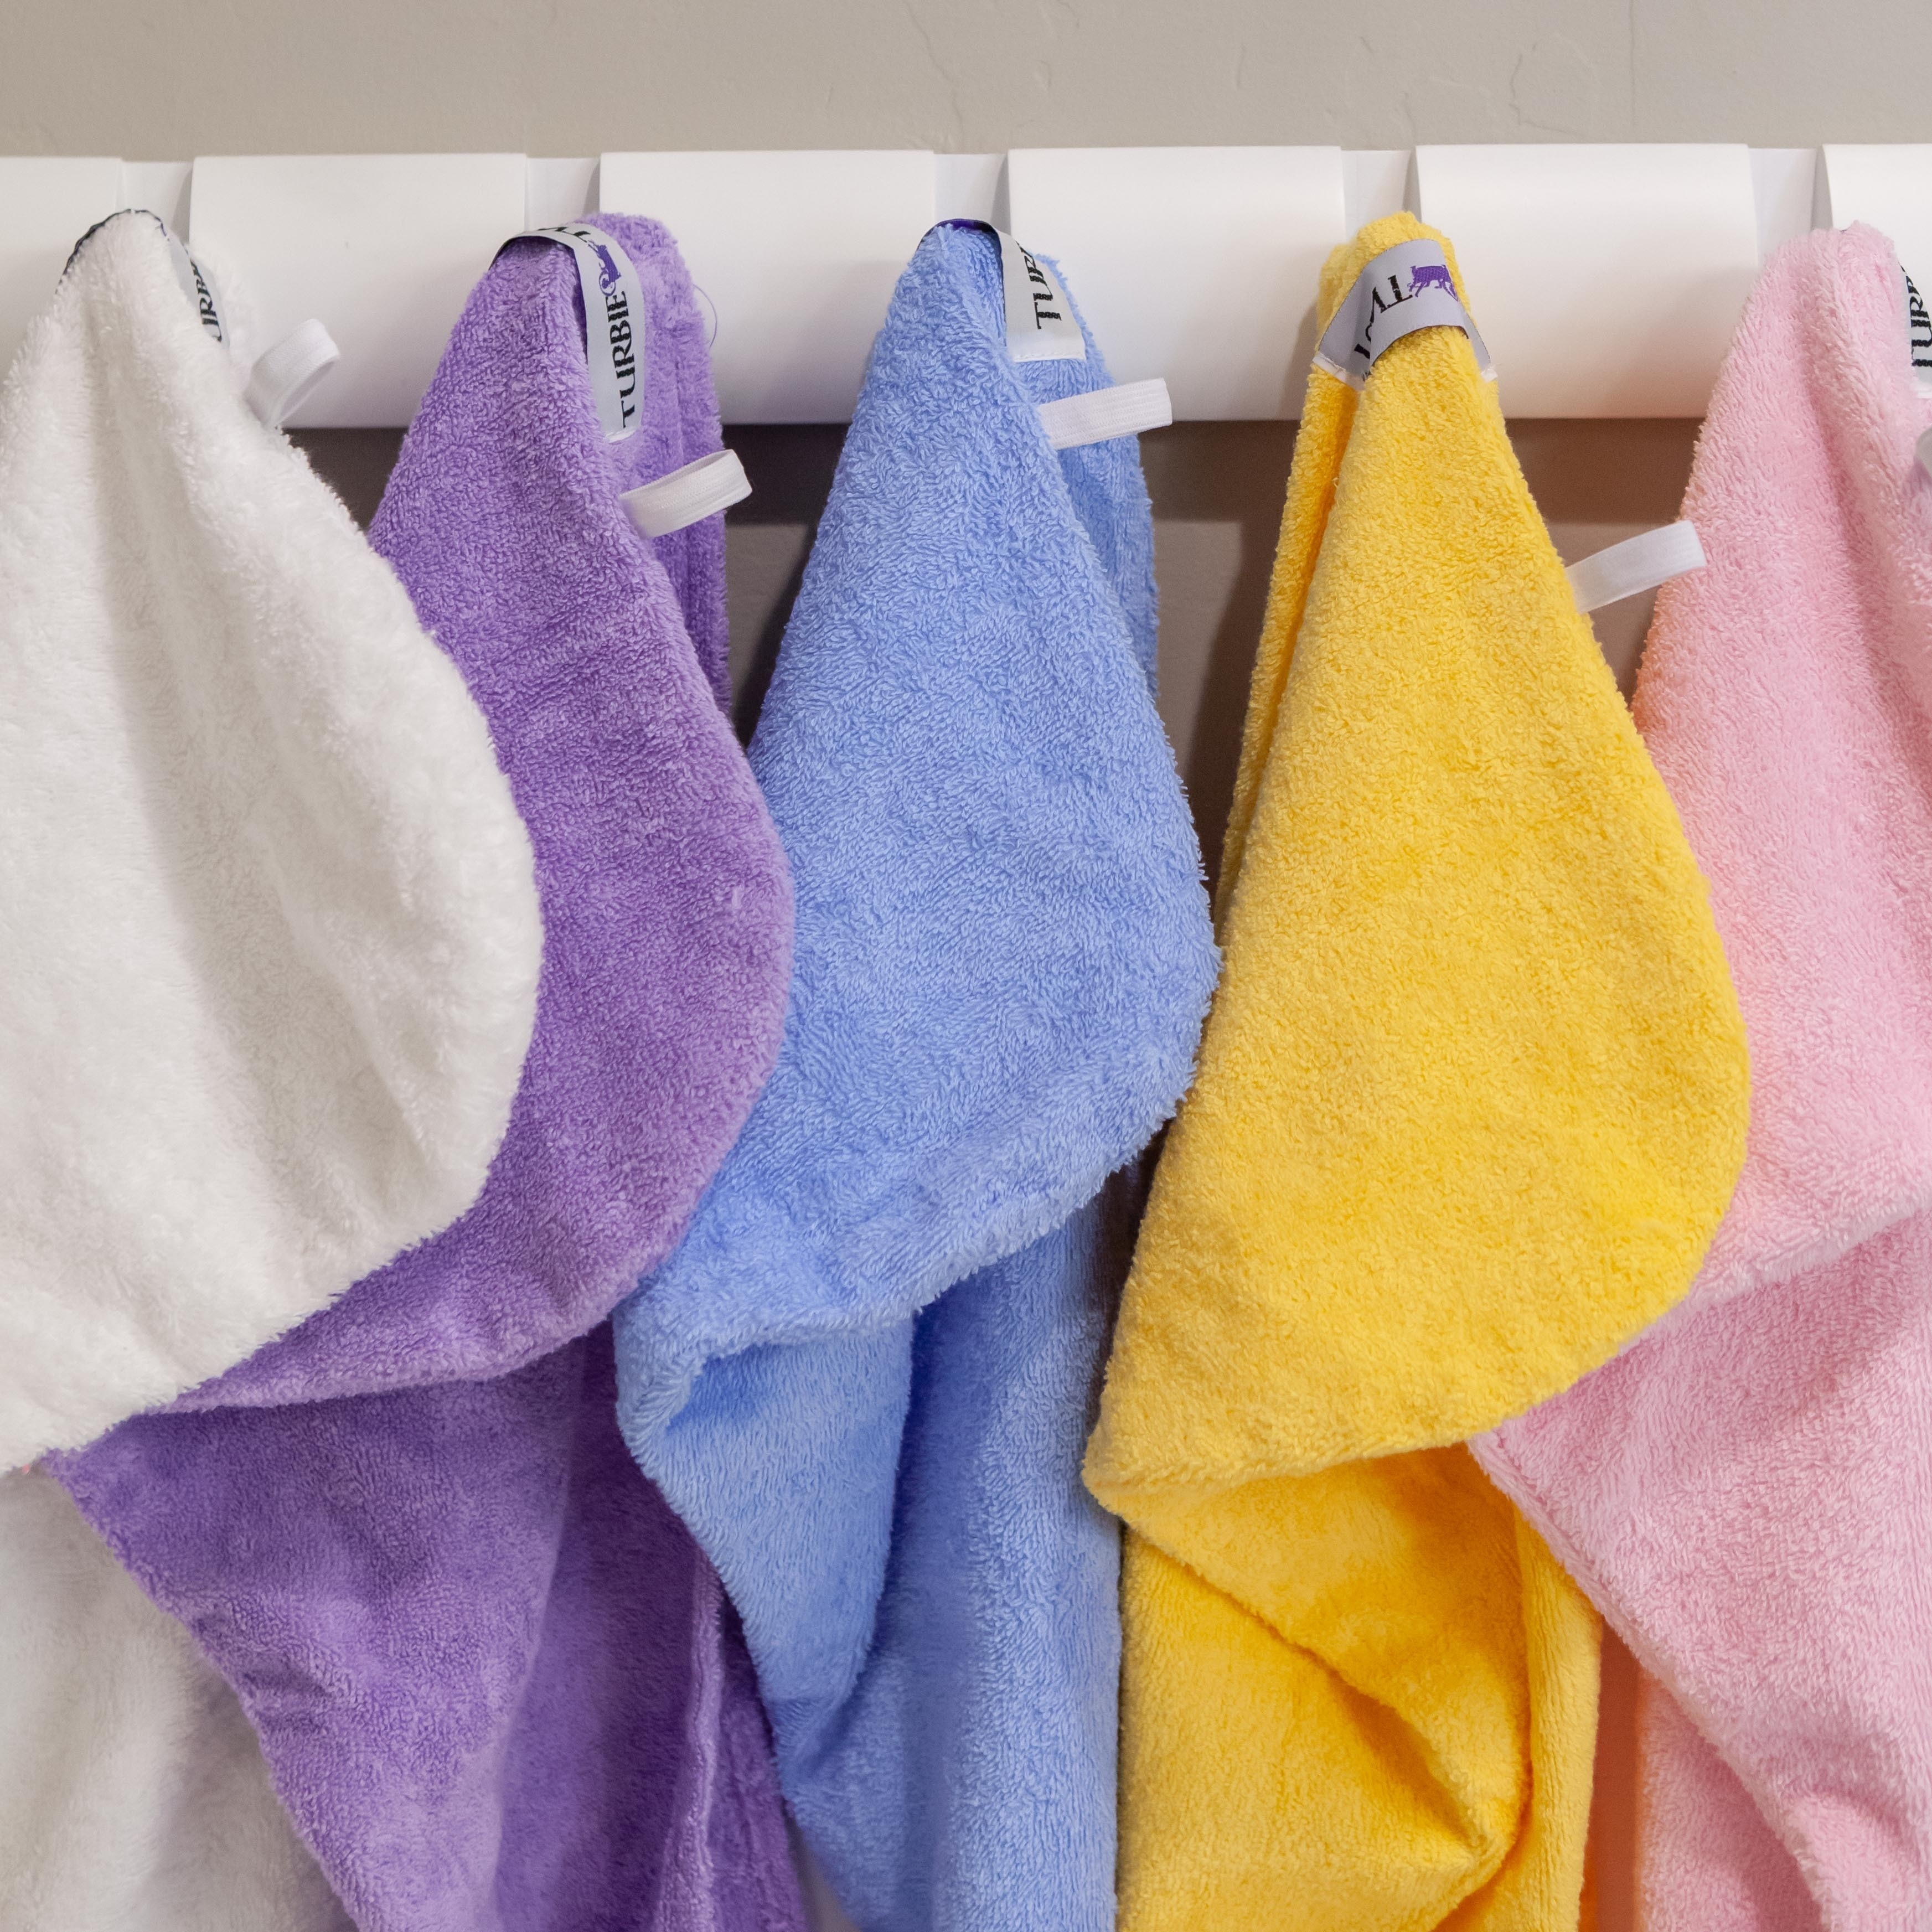 The towels hanging for display in white, purple, blue, yellow and pink